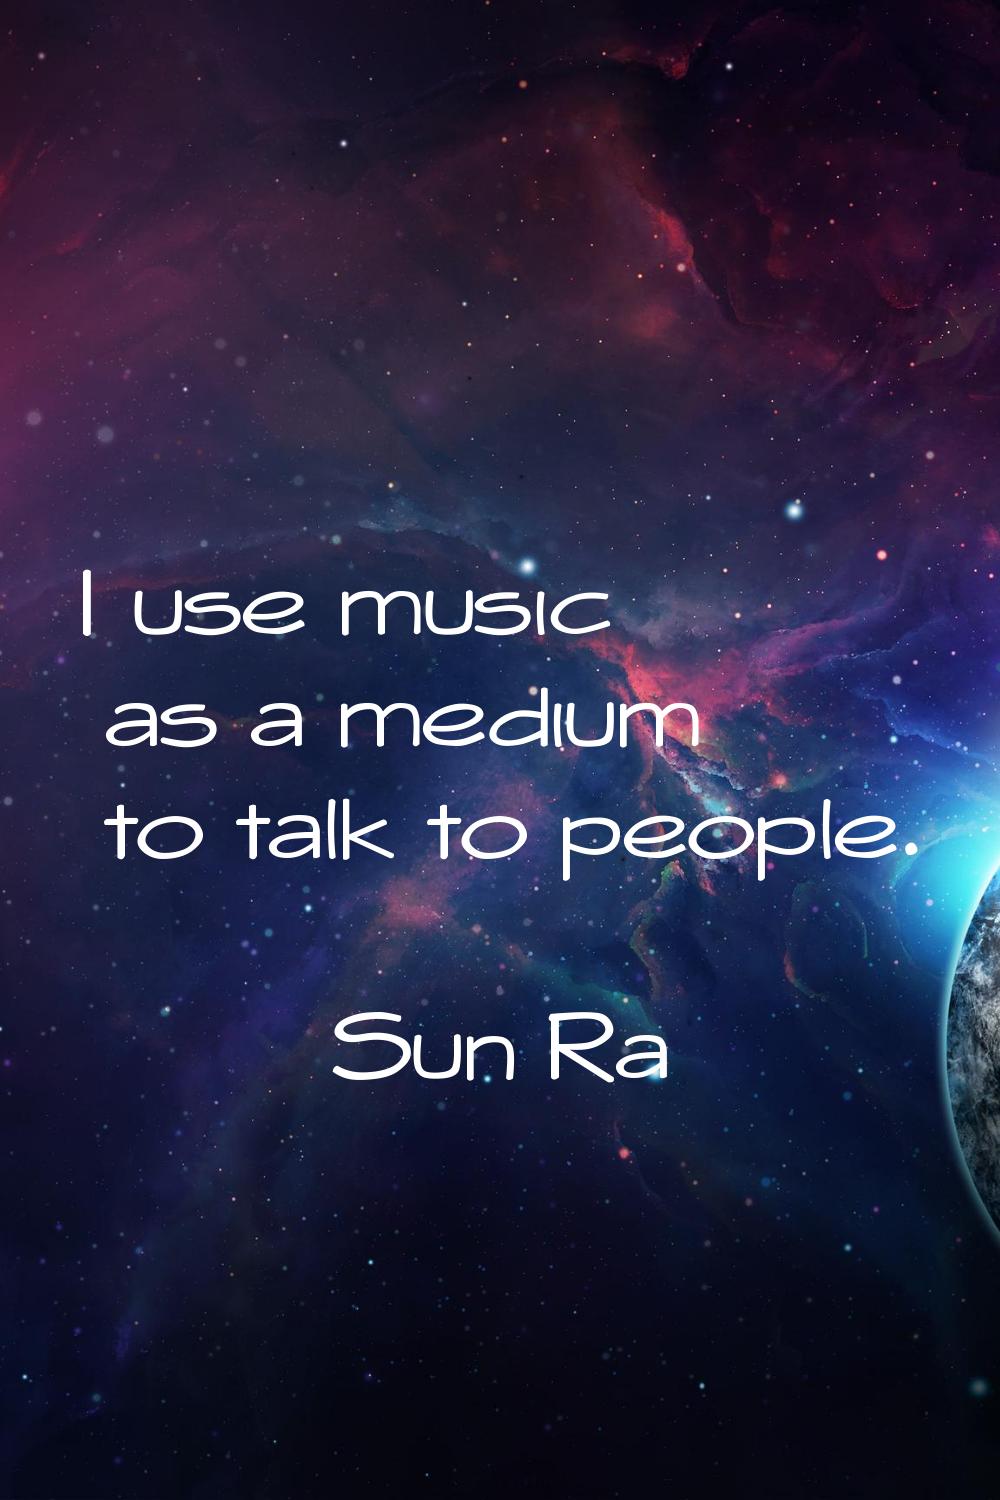 I use music as a medium to talk to people.